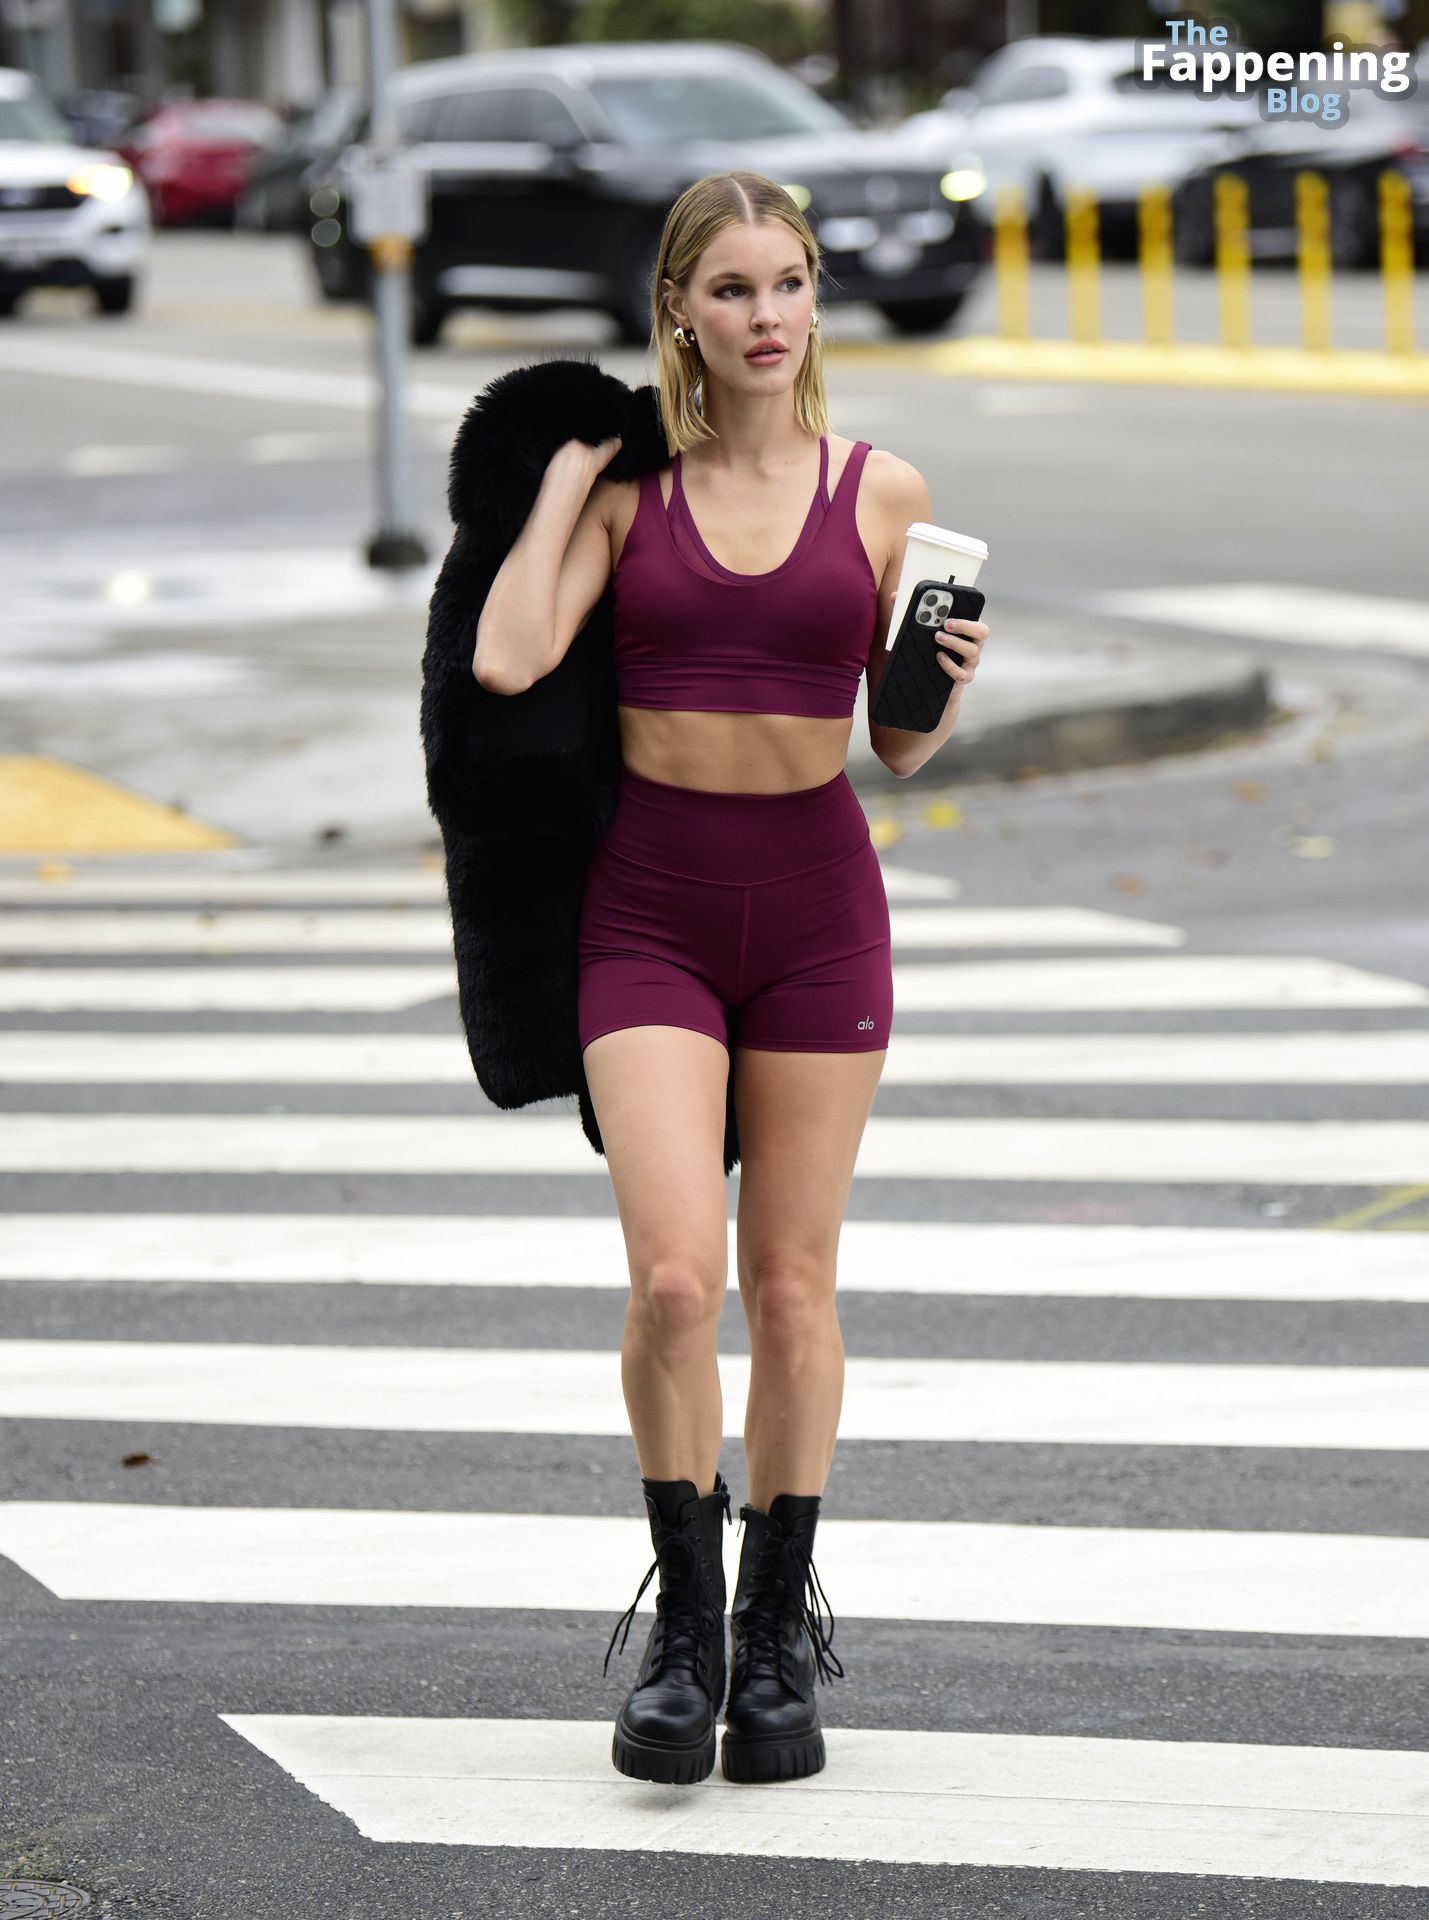 Joy Corrigan is Pictured After a Workout at Alo Yoga in LA (22 Photos)